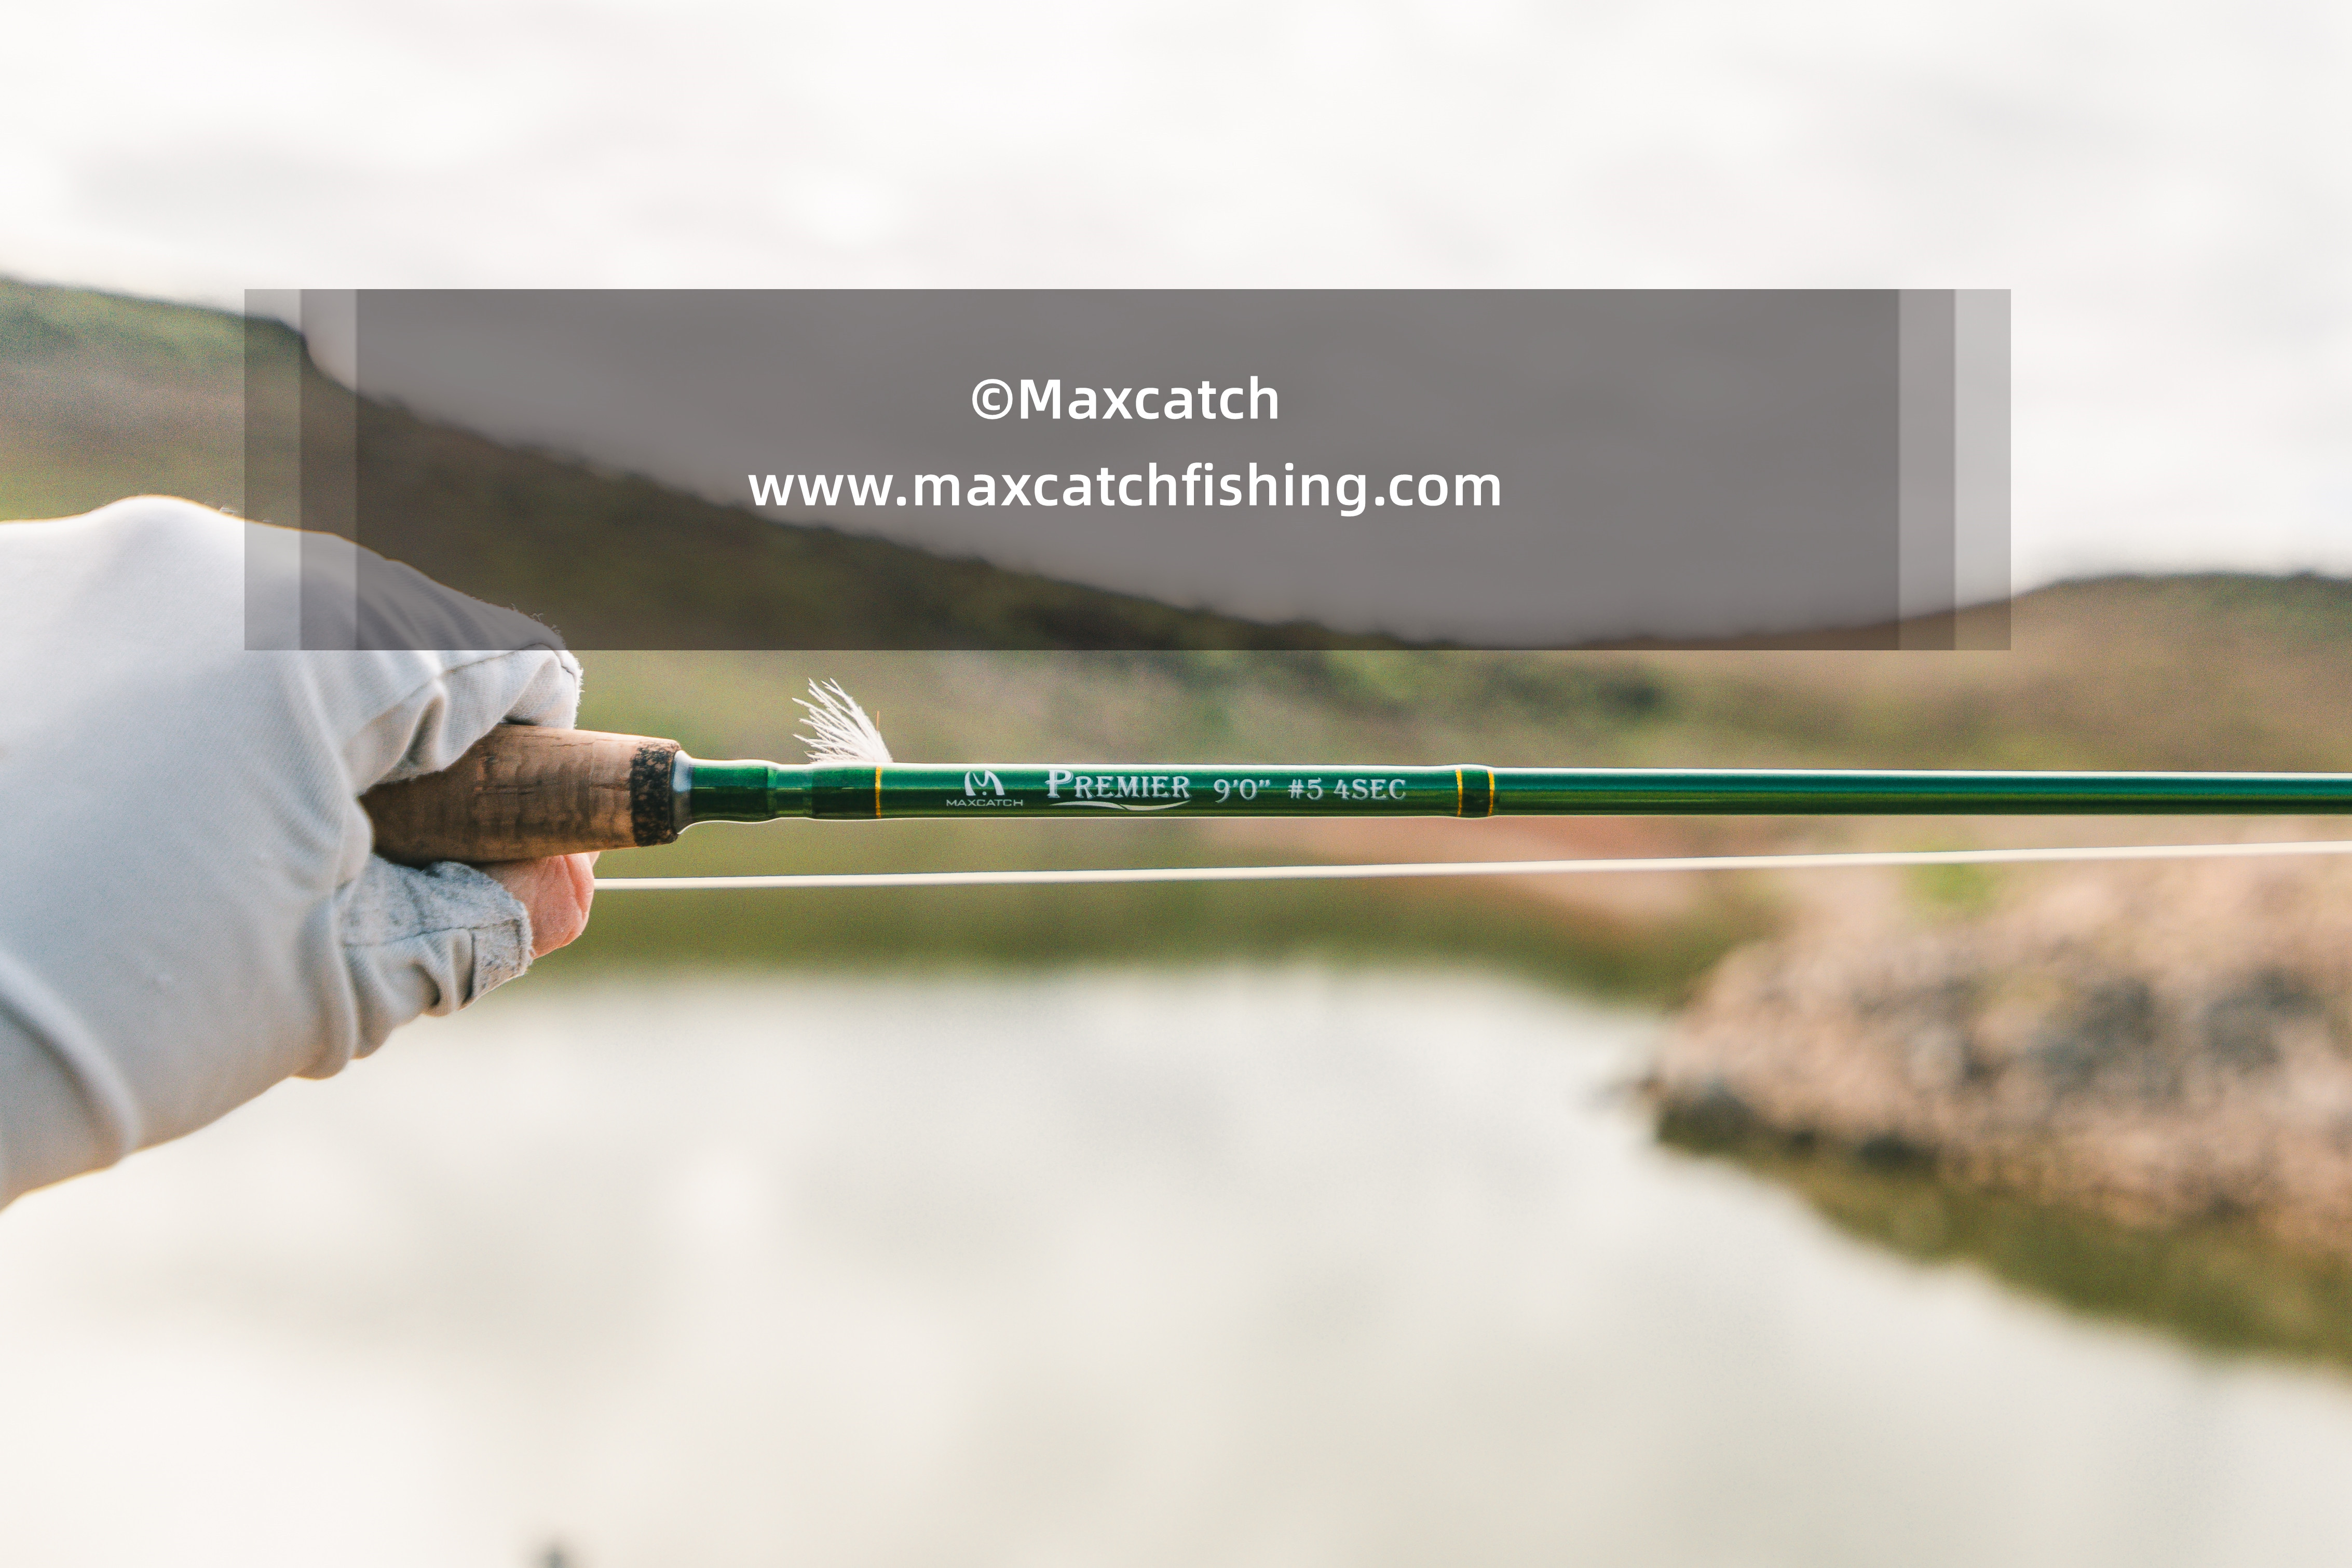 Maxcatch Saltwater Predator Fly fishing Rod and Reel Combo Full Kit 9FT  Fishing Complete Outfit